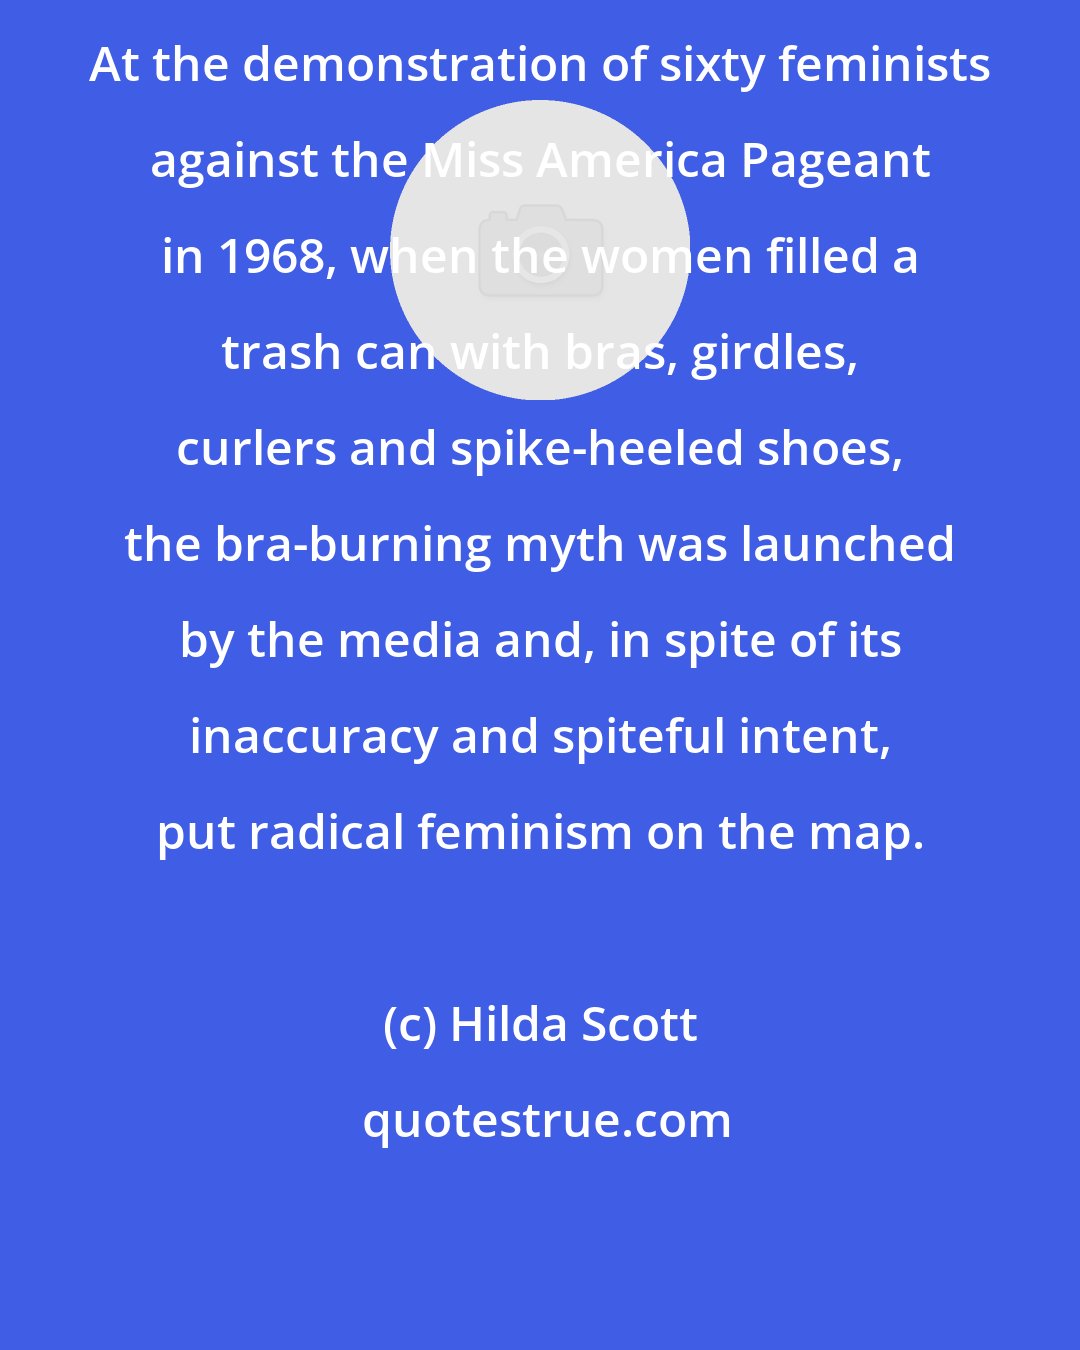 Hilda Scott: At the demonstration of sixty feminists against the Miss America Pageant in 1968, when the women filled a trash can with bras, girdles, curlers and spike-heeled shoes, the bra-burning myth was launched by the media and, in spite of its inaccuracy and spiteful intent, put radical feminism on the map.